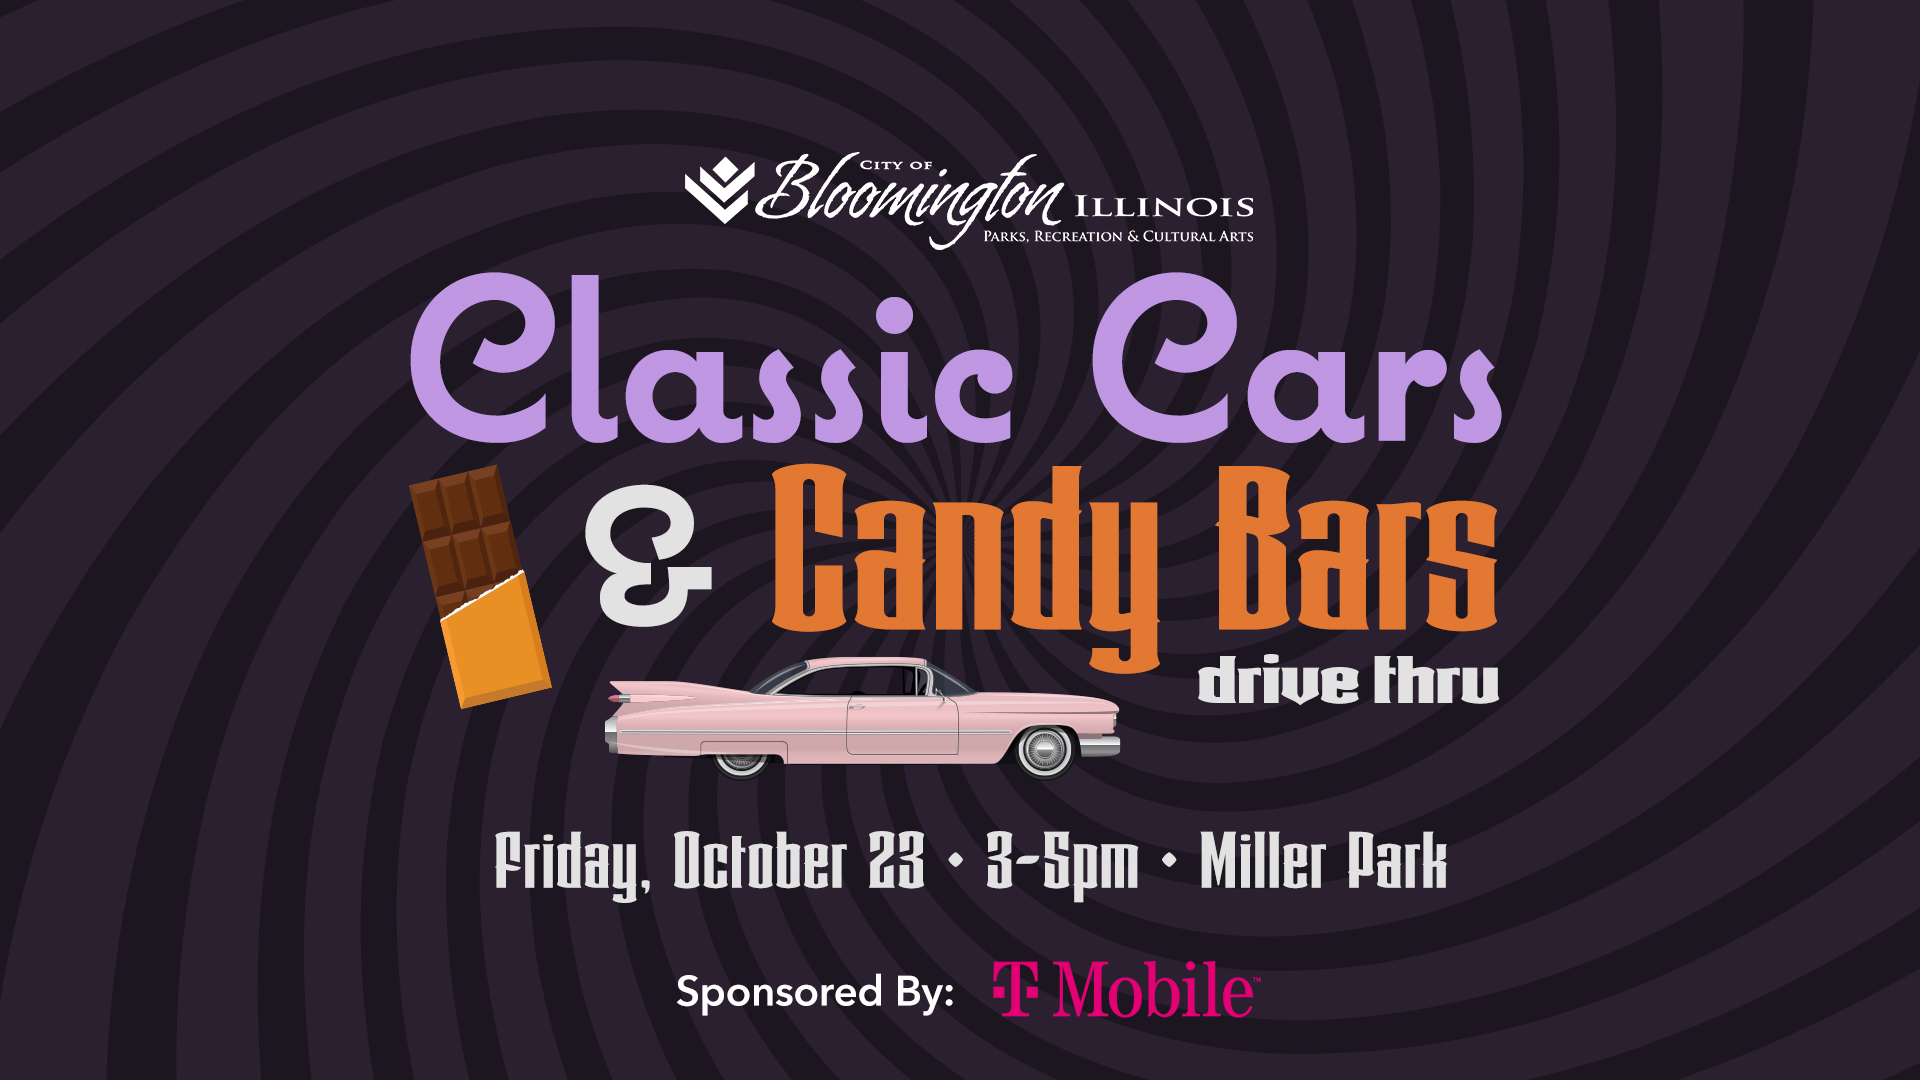 Classic Cars & Candy Bars Free Halloween Event - Sponsored by T-Mobile